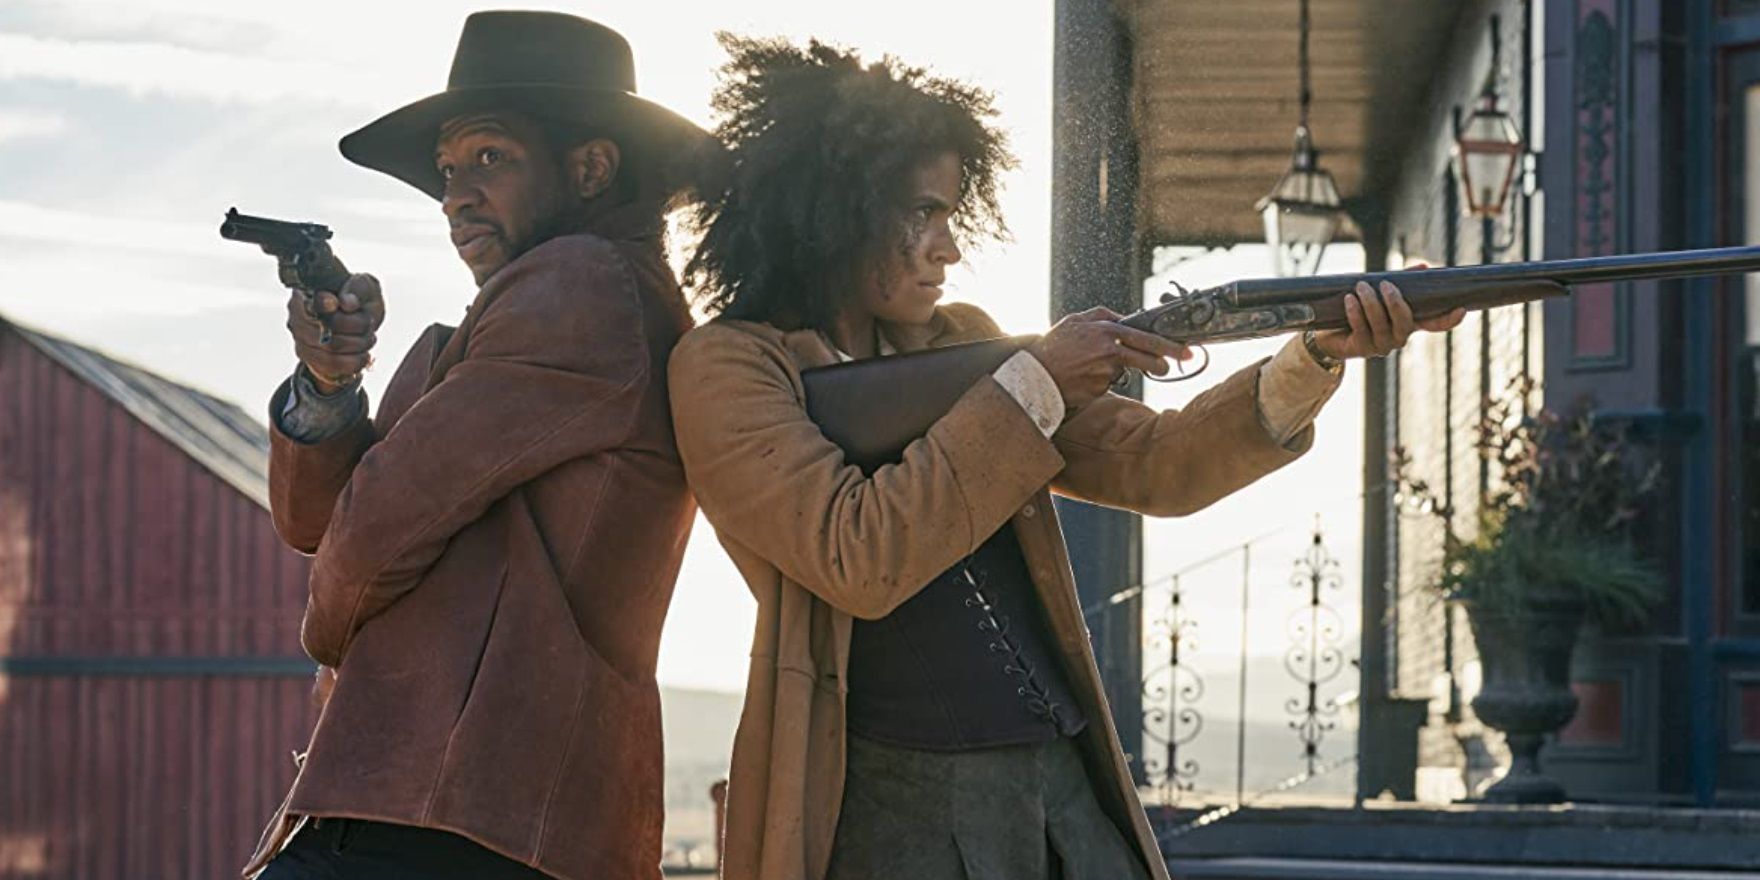 Jonathan Majors and Zazie Beetz shooting back-to-back in The Harder They Fall